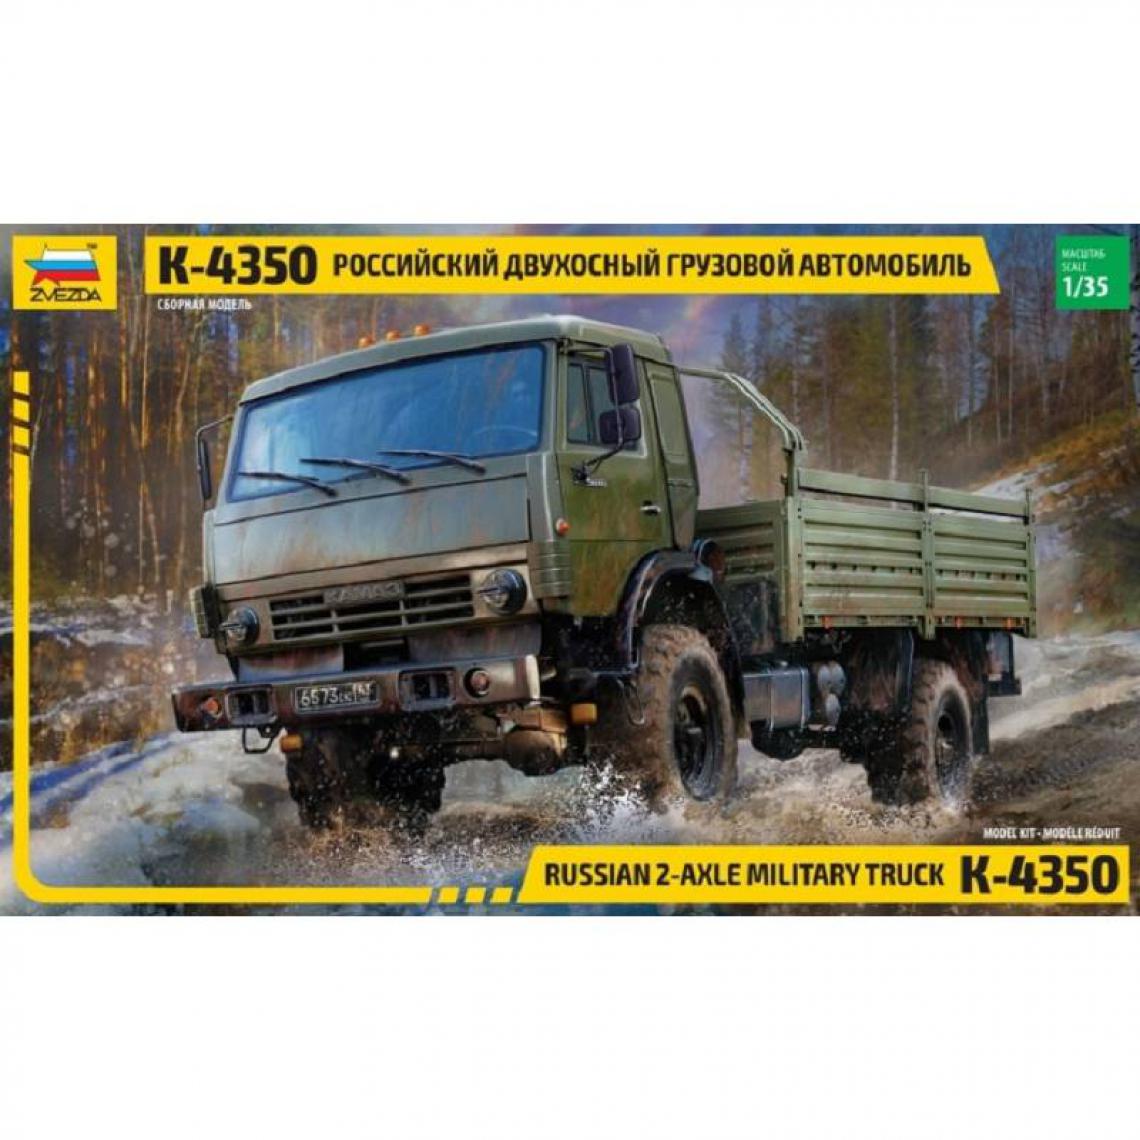 Zvezda - Maquette Camion Russian 2-axle Military Truck K-4350 - Camions